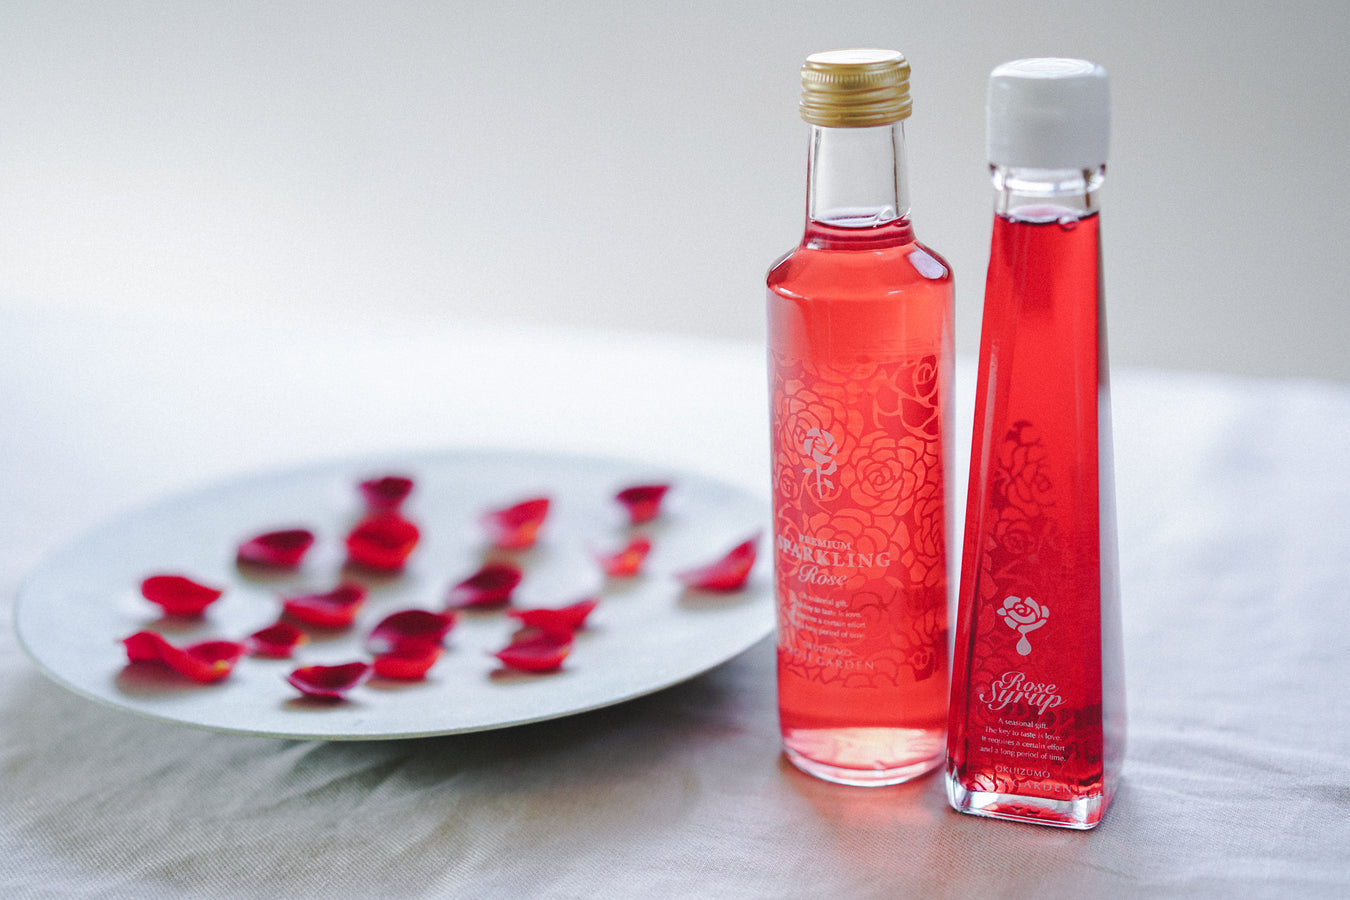 Two bottles of rose water standing next to a plate of rose petals